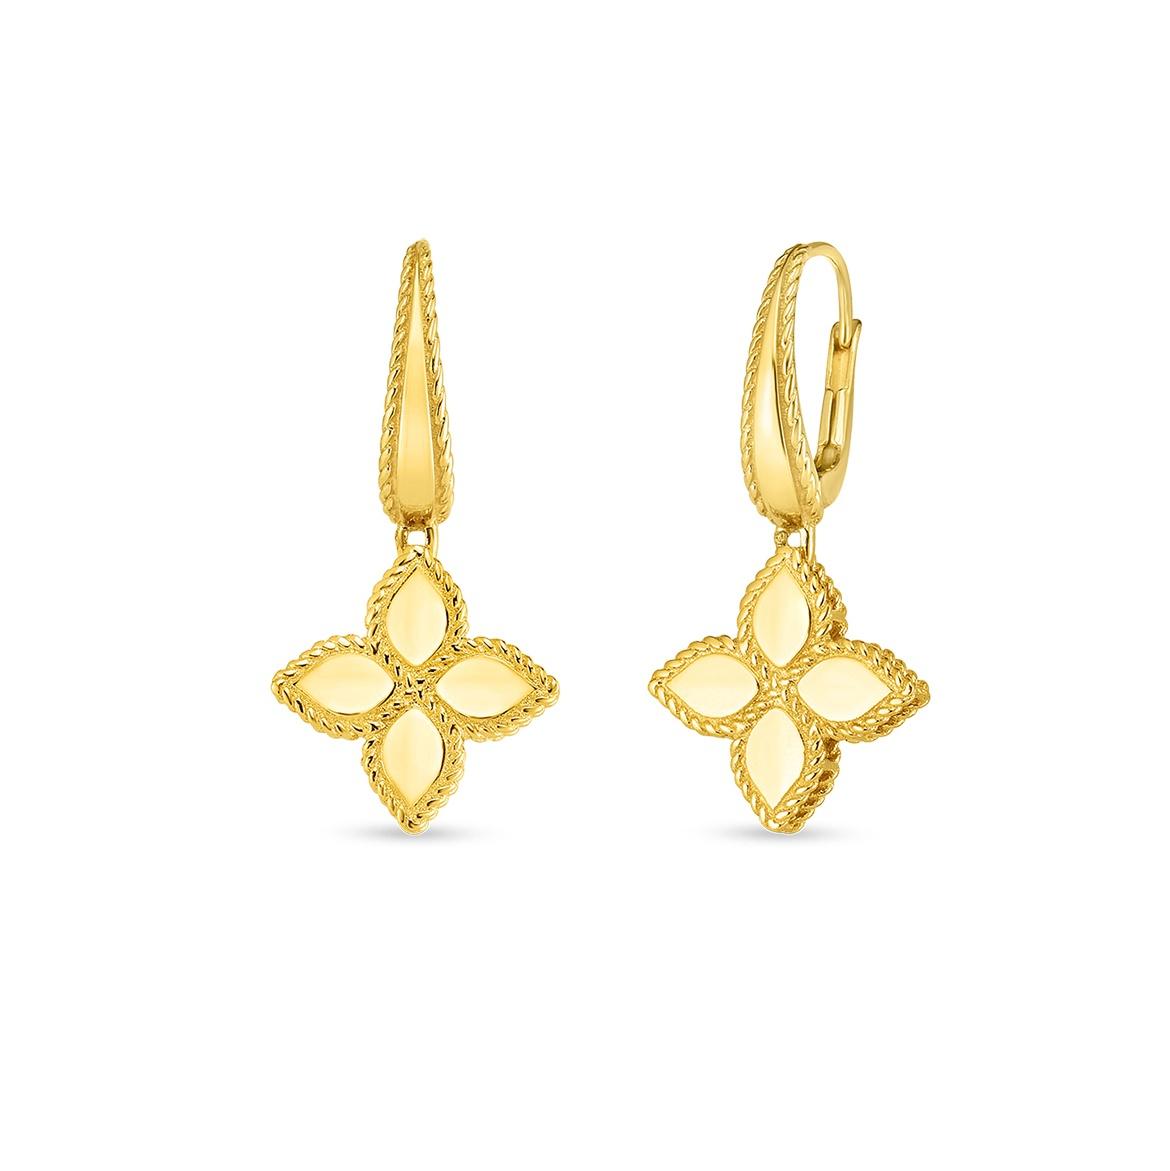 Roberto Coin 18K Yellow Gold Princess Flower Drop Earrings, 1.25 inches 0